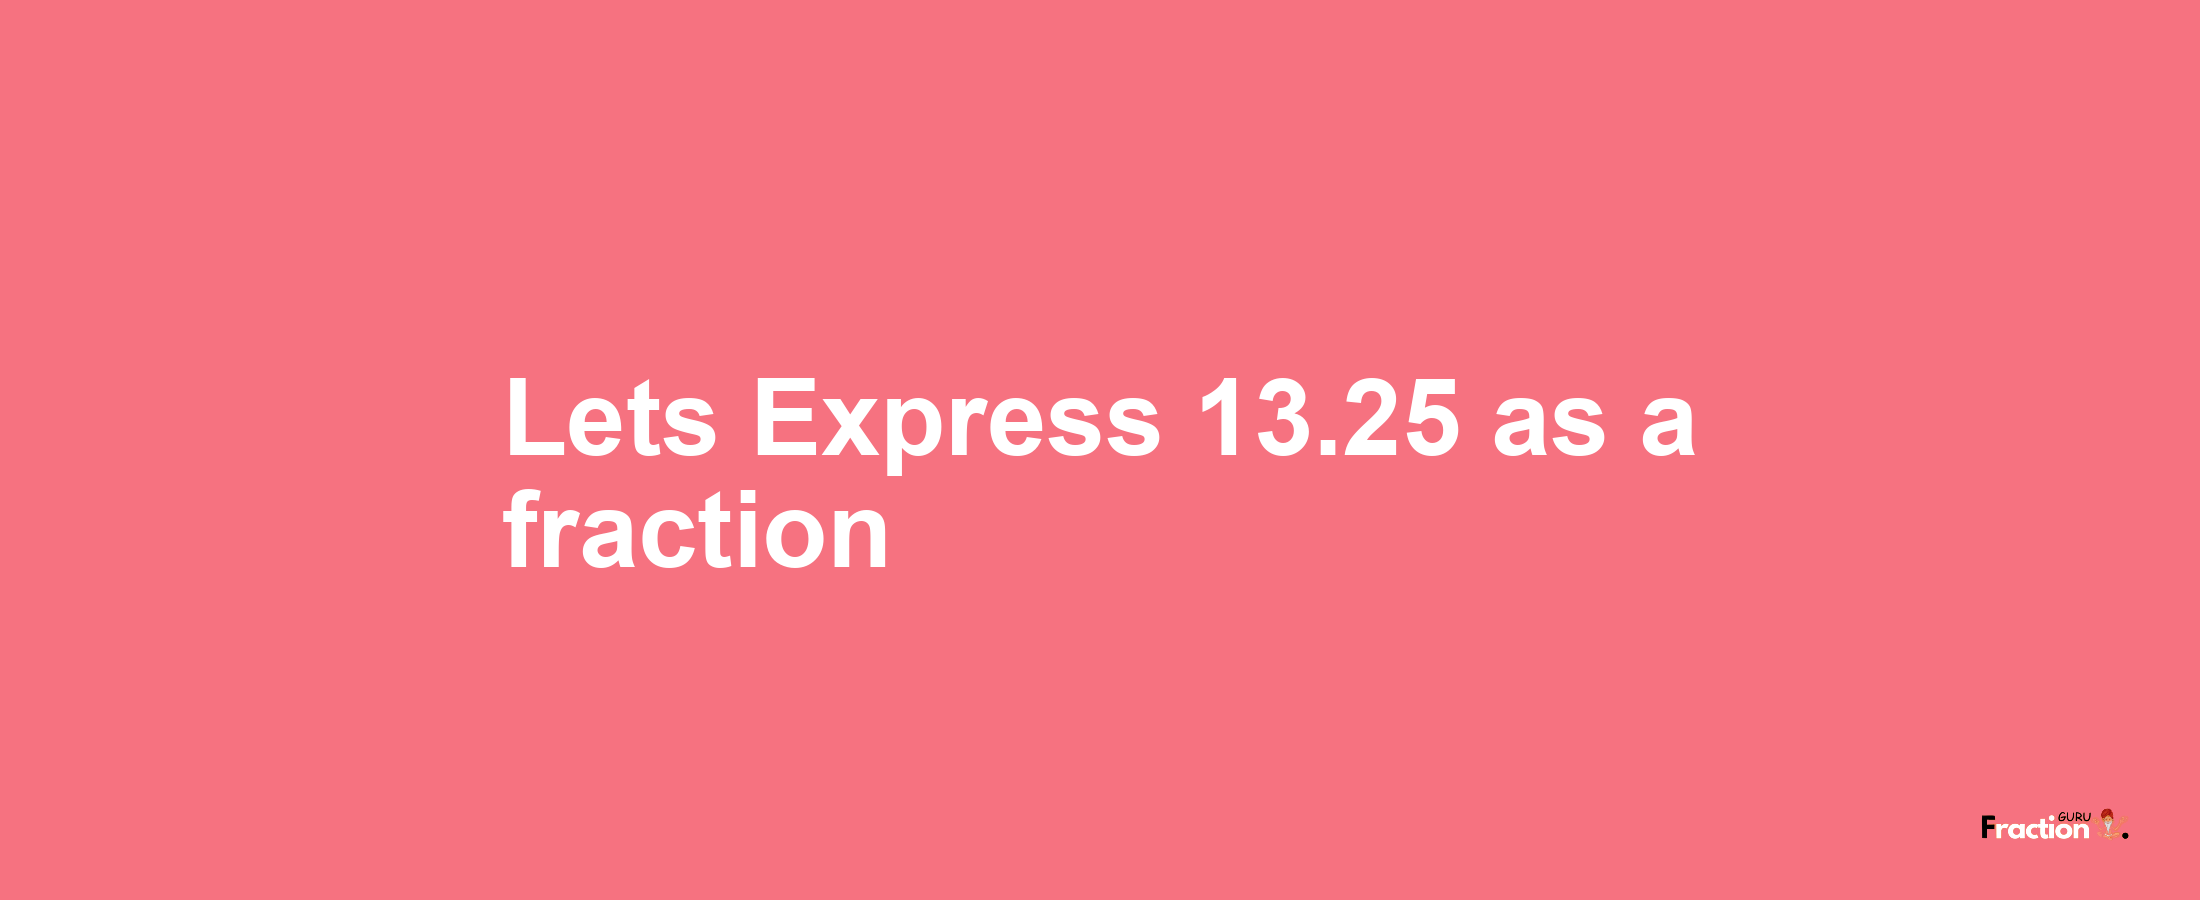 Lets Express 13.25 as afraction